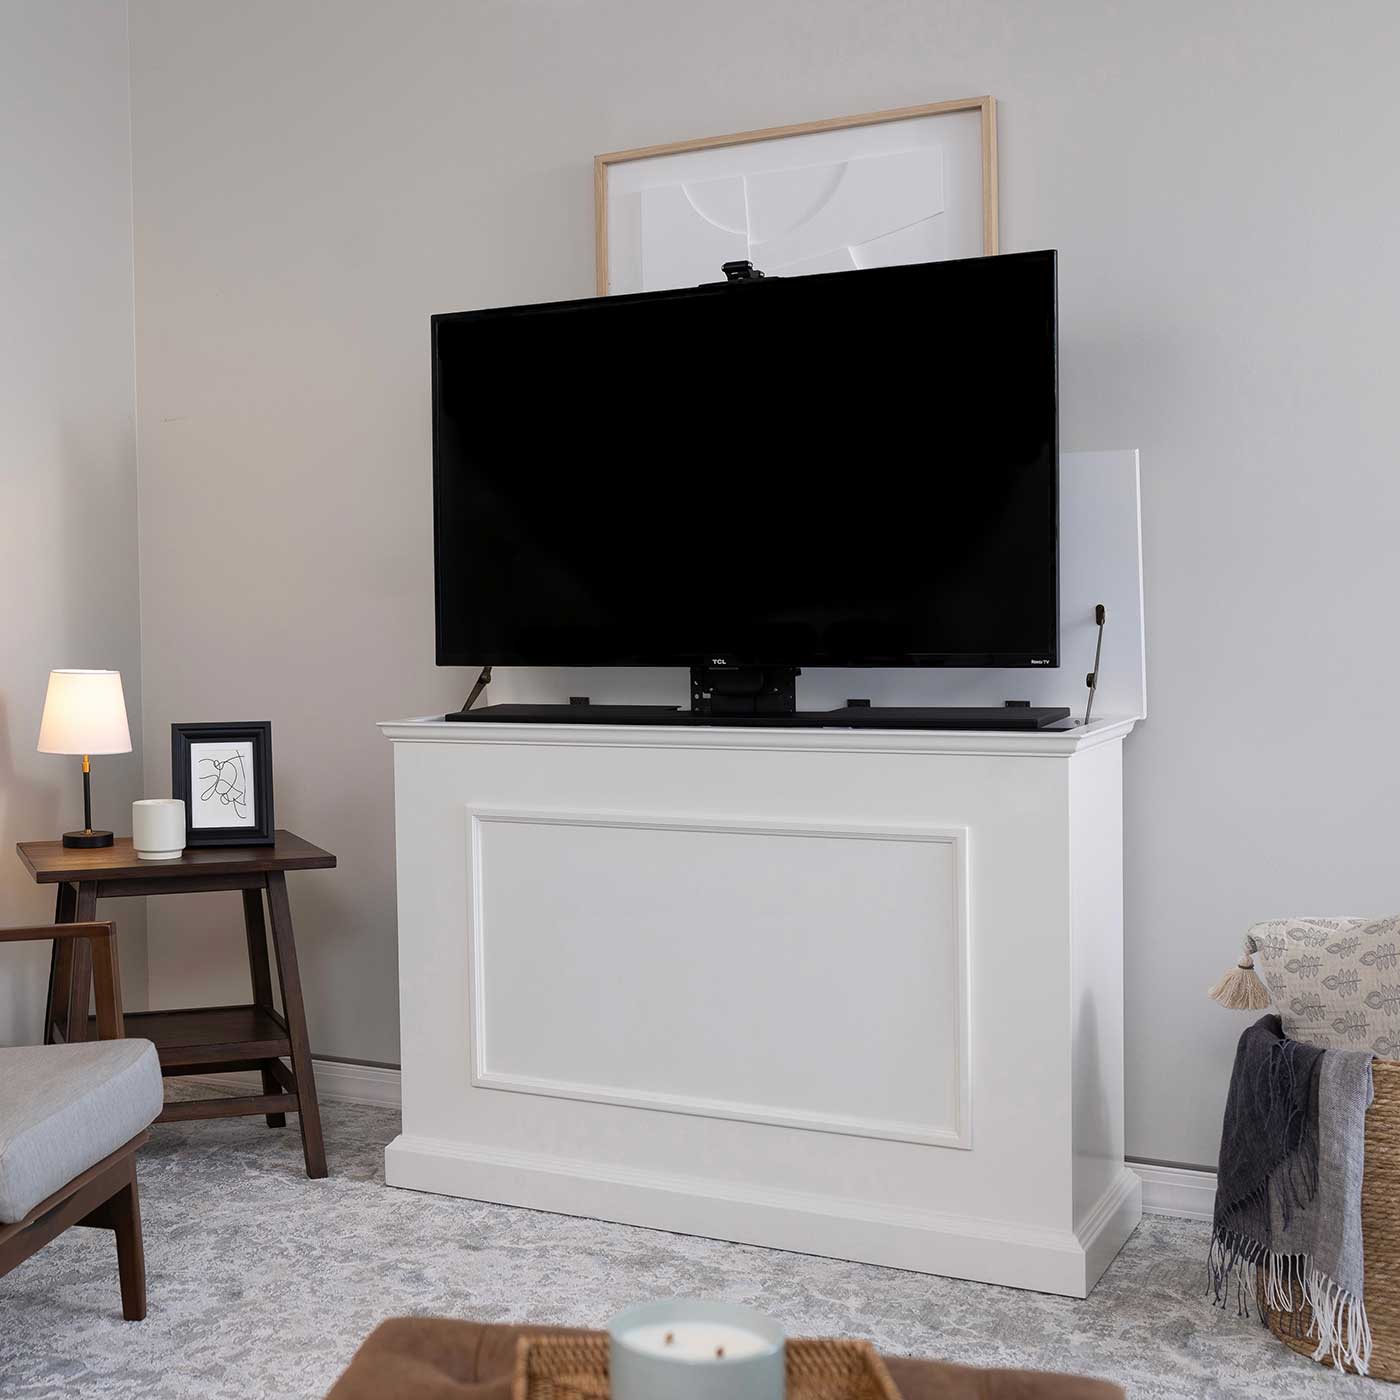 Touchstone Elevate 72015 TV Lift pictured in a living room with the cabinet opened fully.